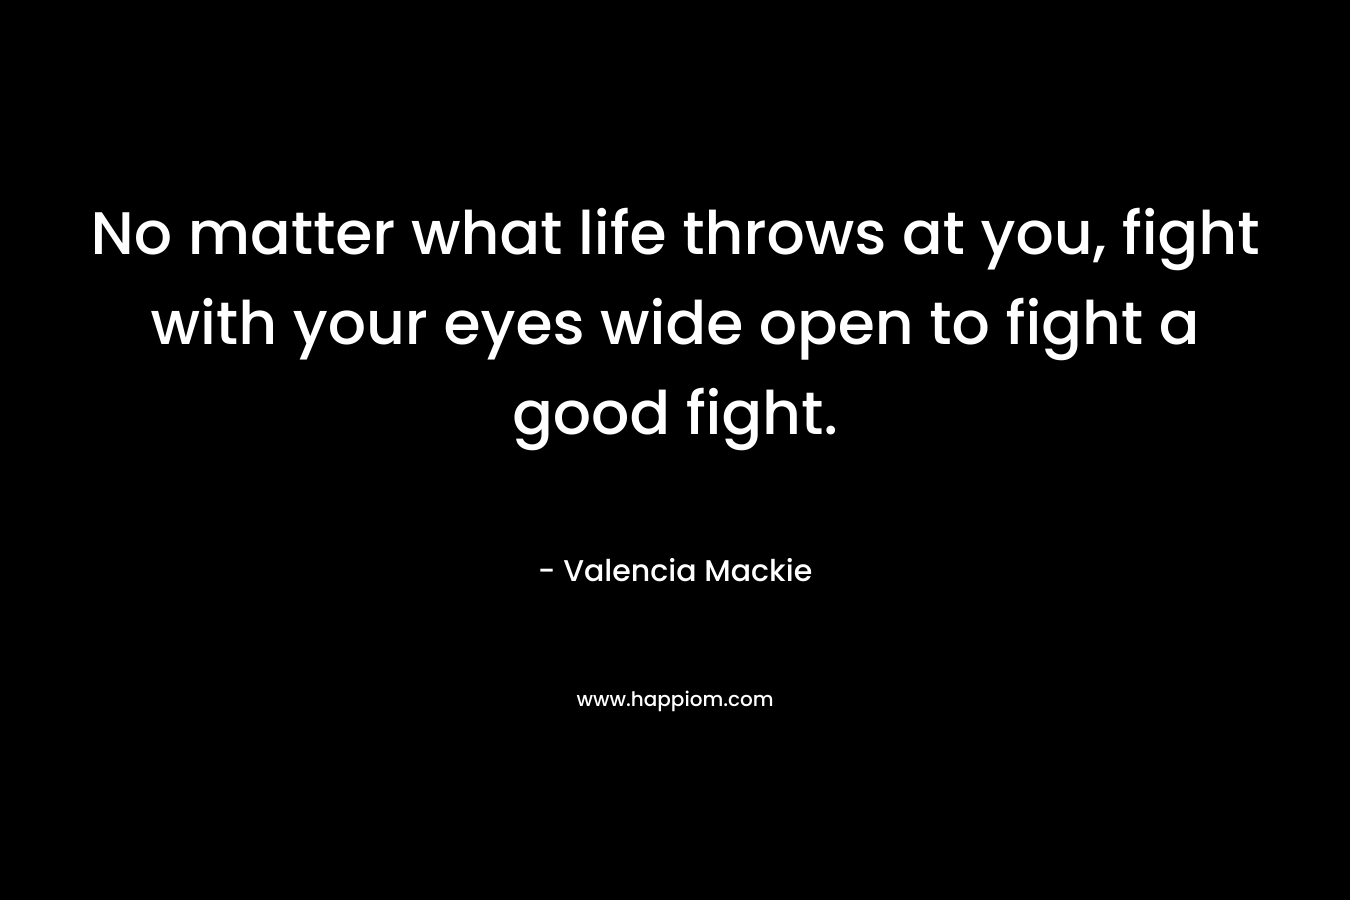 No matter what life throws at you, fight with your eyes wide open to fight a good fight.